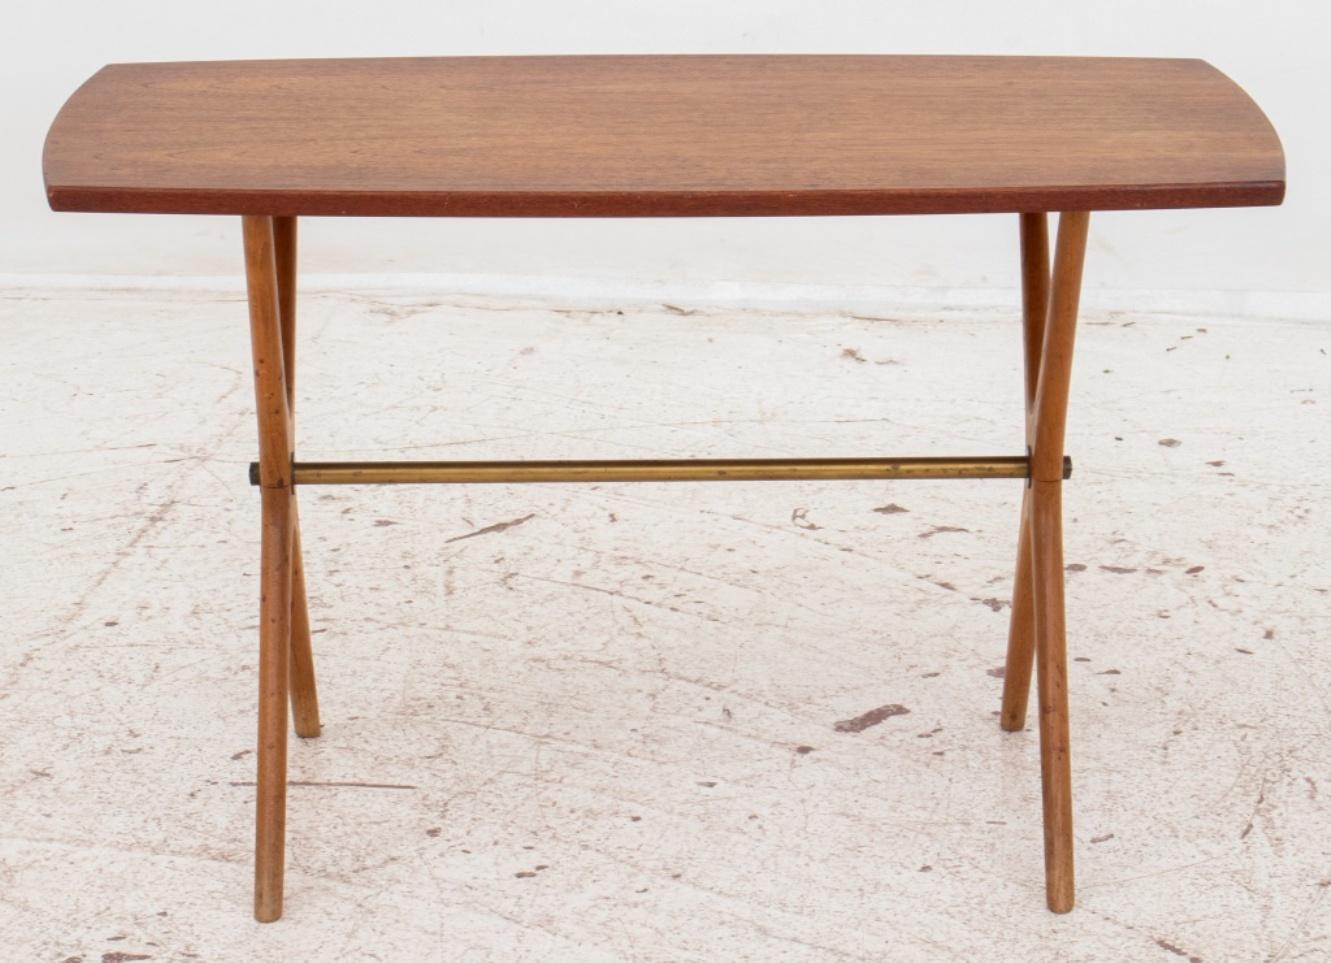 Jo Carlsson for JOC Vetlanda Mid-Century Modern walnut side table with rounded rectangular top on X-form supports connected by a brass stretcher. In good vintage condition. Wear consistent with age and use.

Dimensions: 19